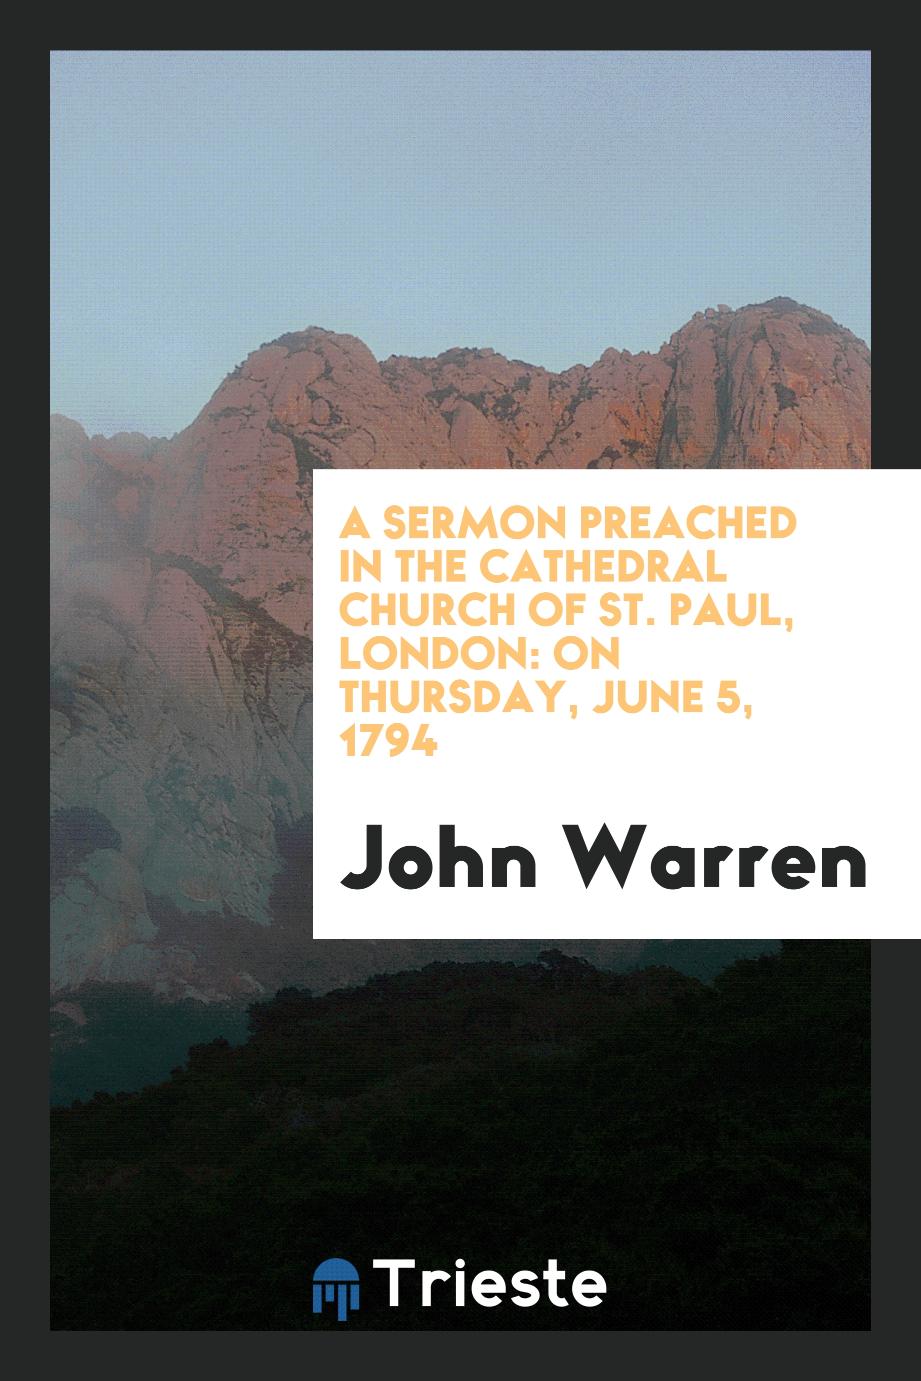 A Sermon Preached in the Cathedral Church of St. Paul, London: On Thursday, June 5, 1794